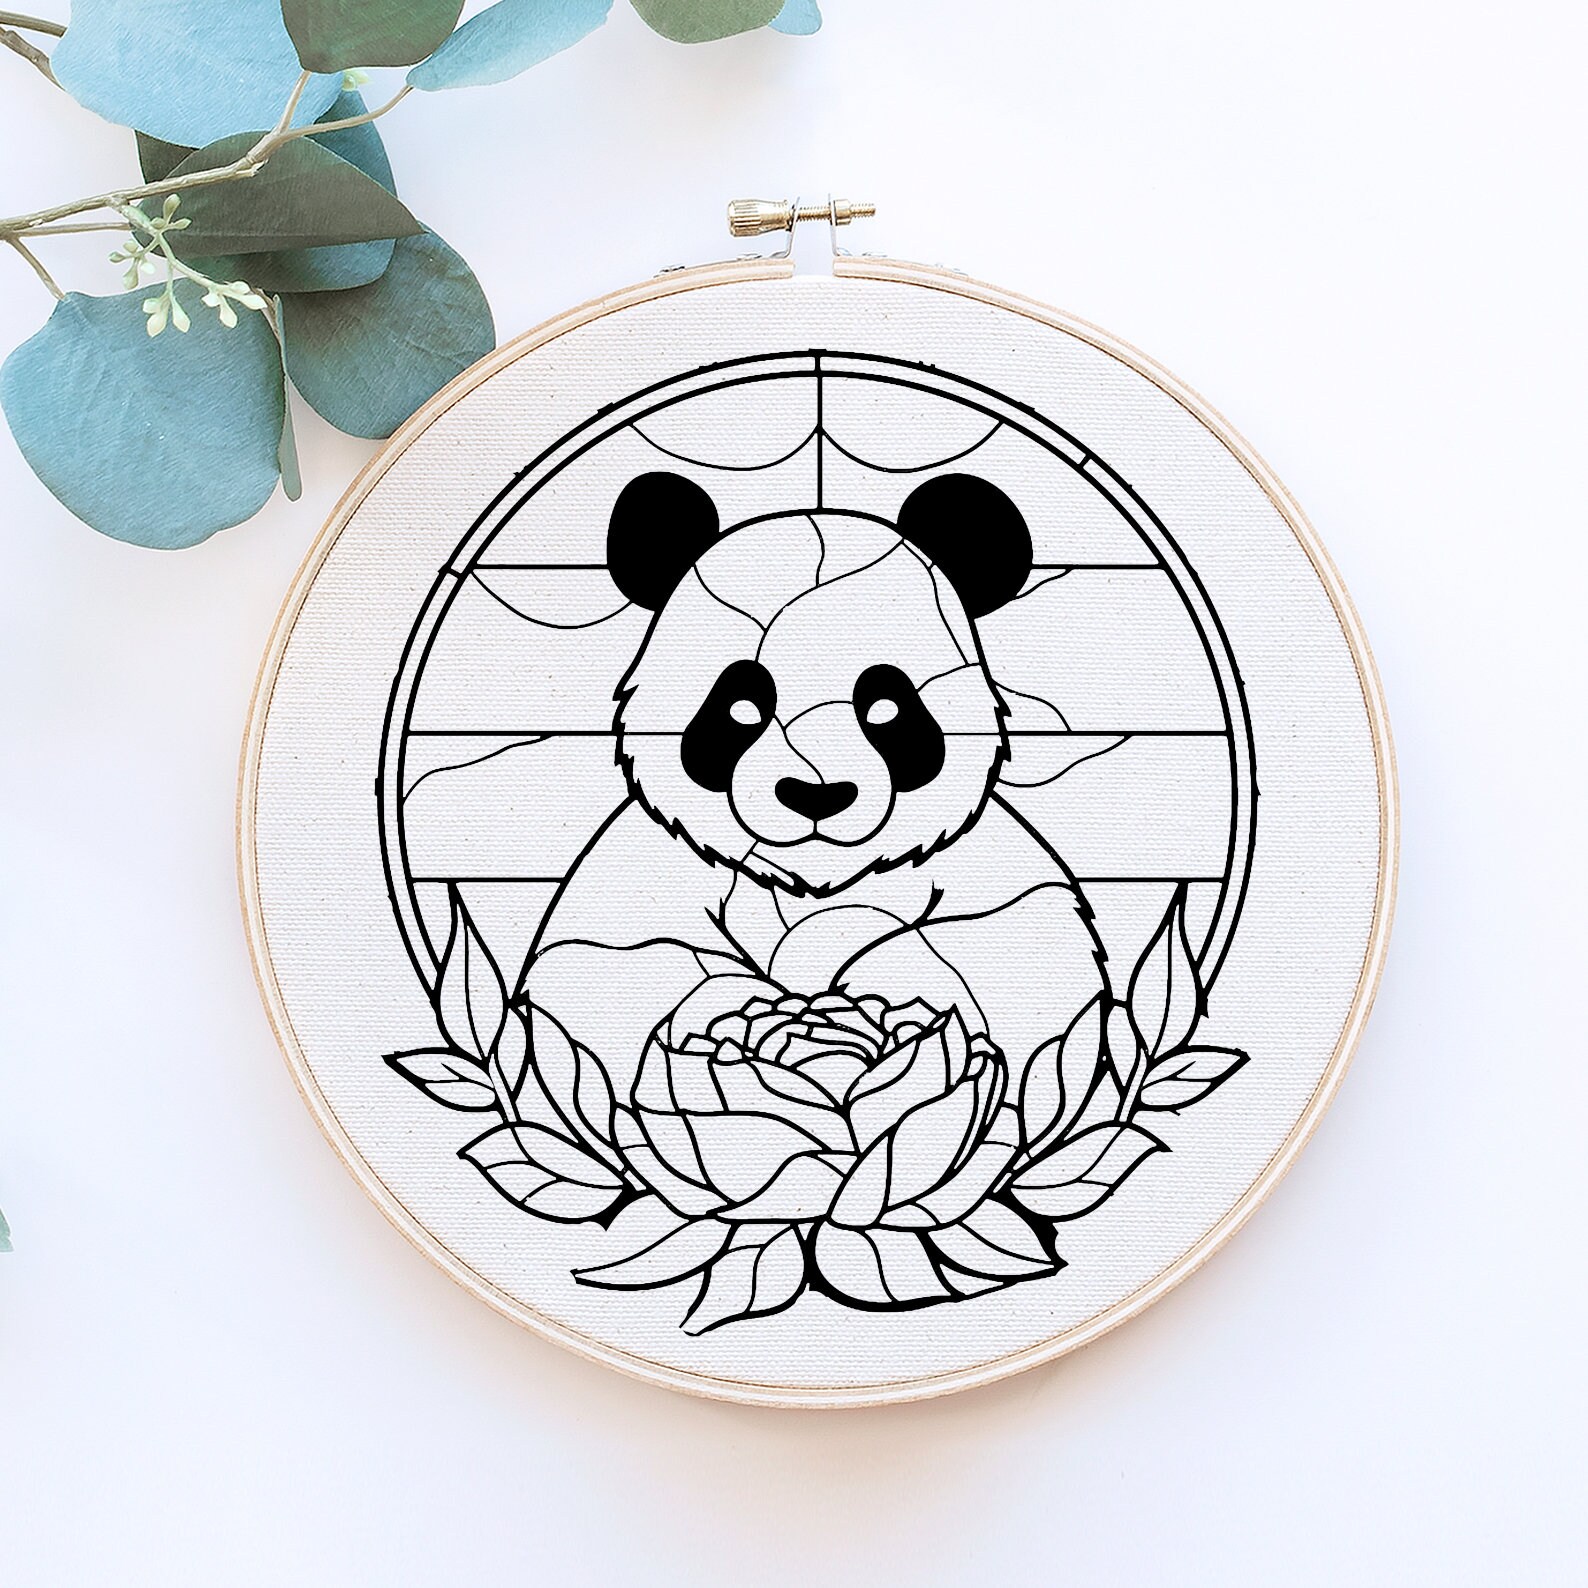 Panda Embroidery Kit, Beginners Embroidery, Kids Friendly Crafts, Kids  Christmas Gifts, Hand Embroidery Kit 